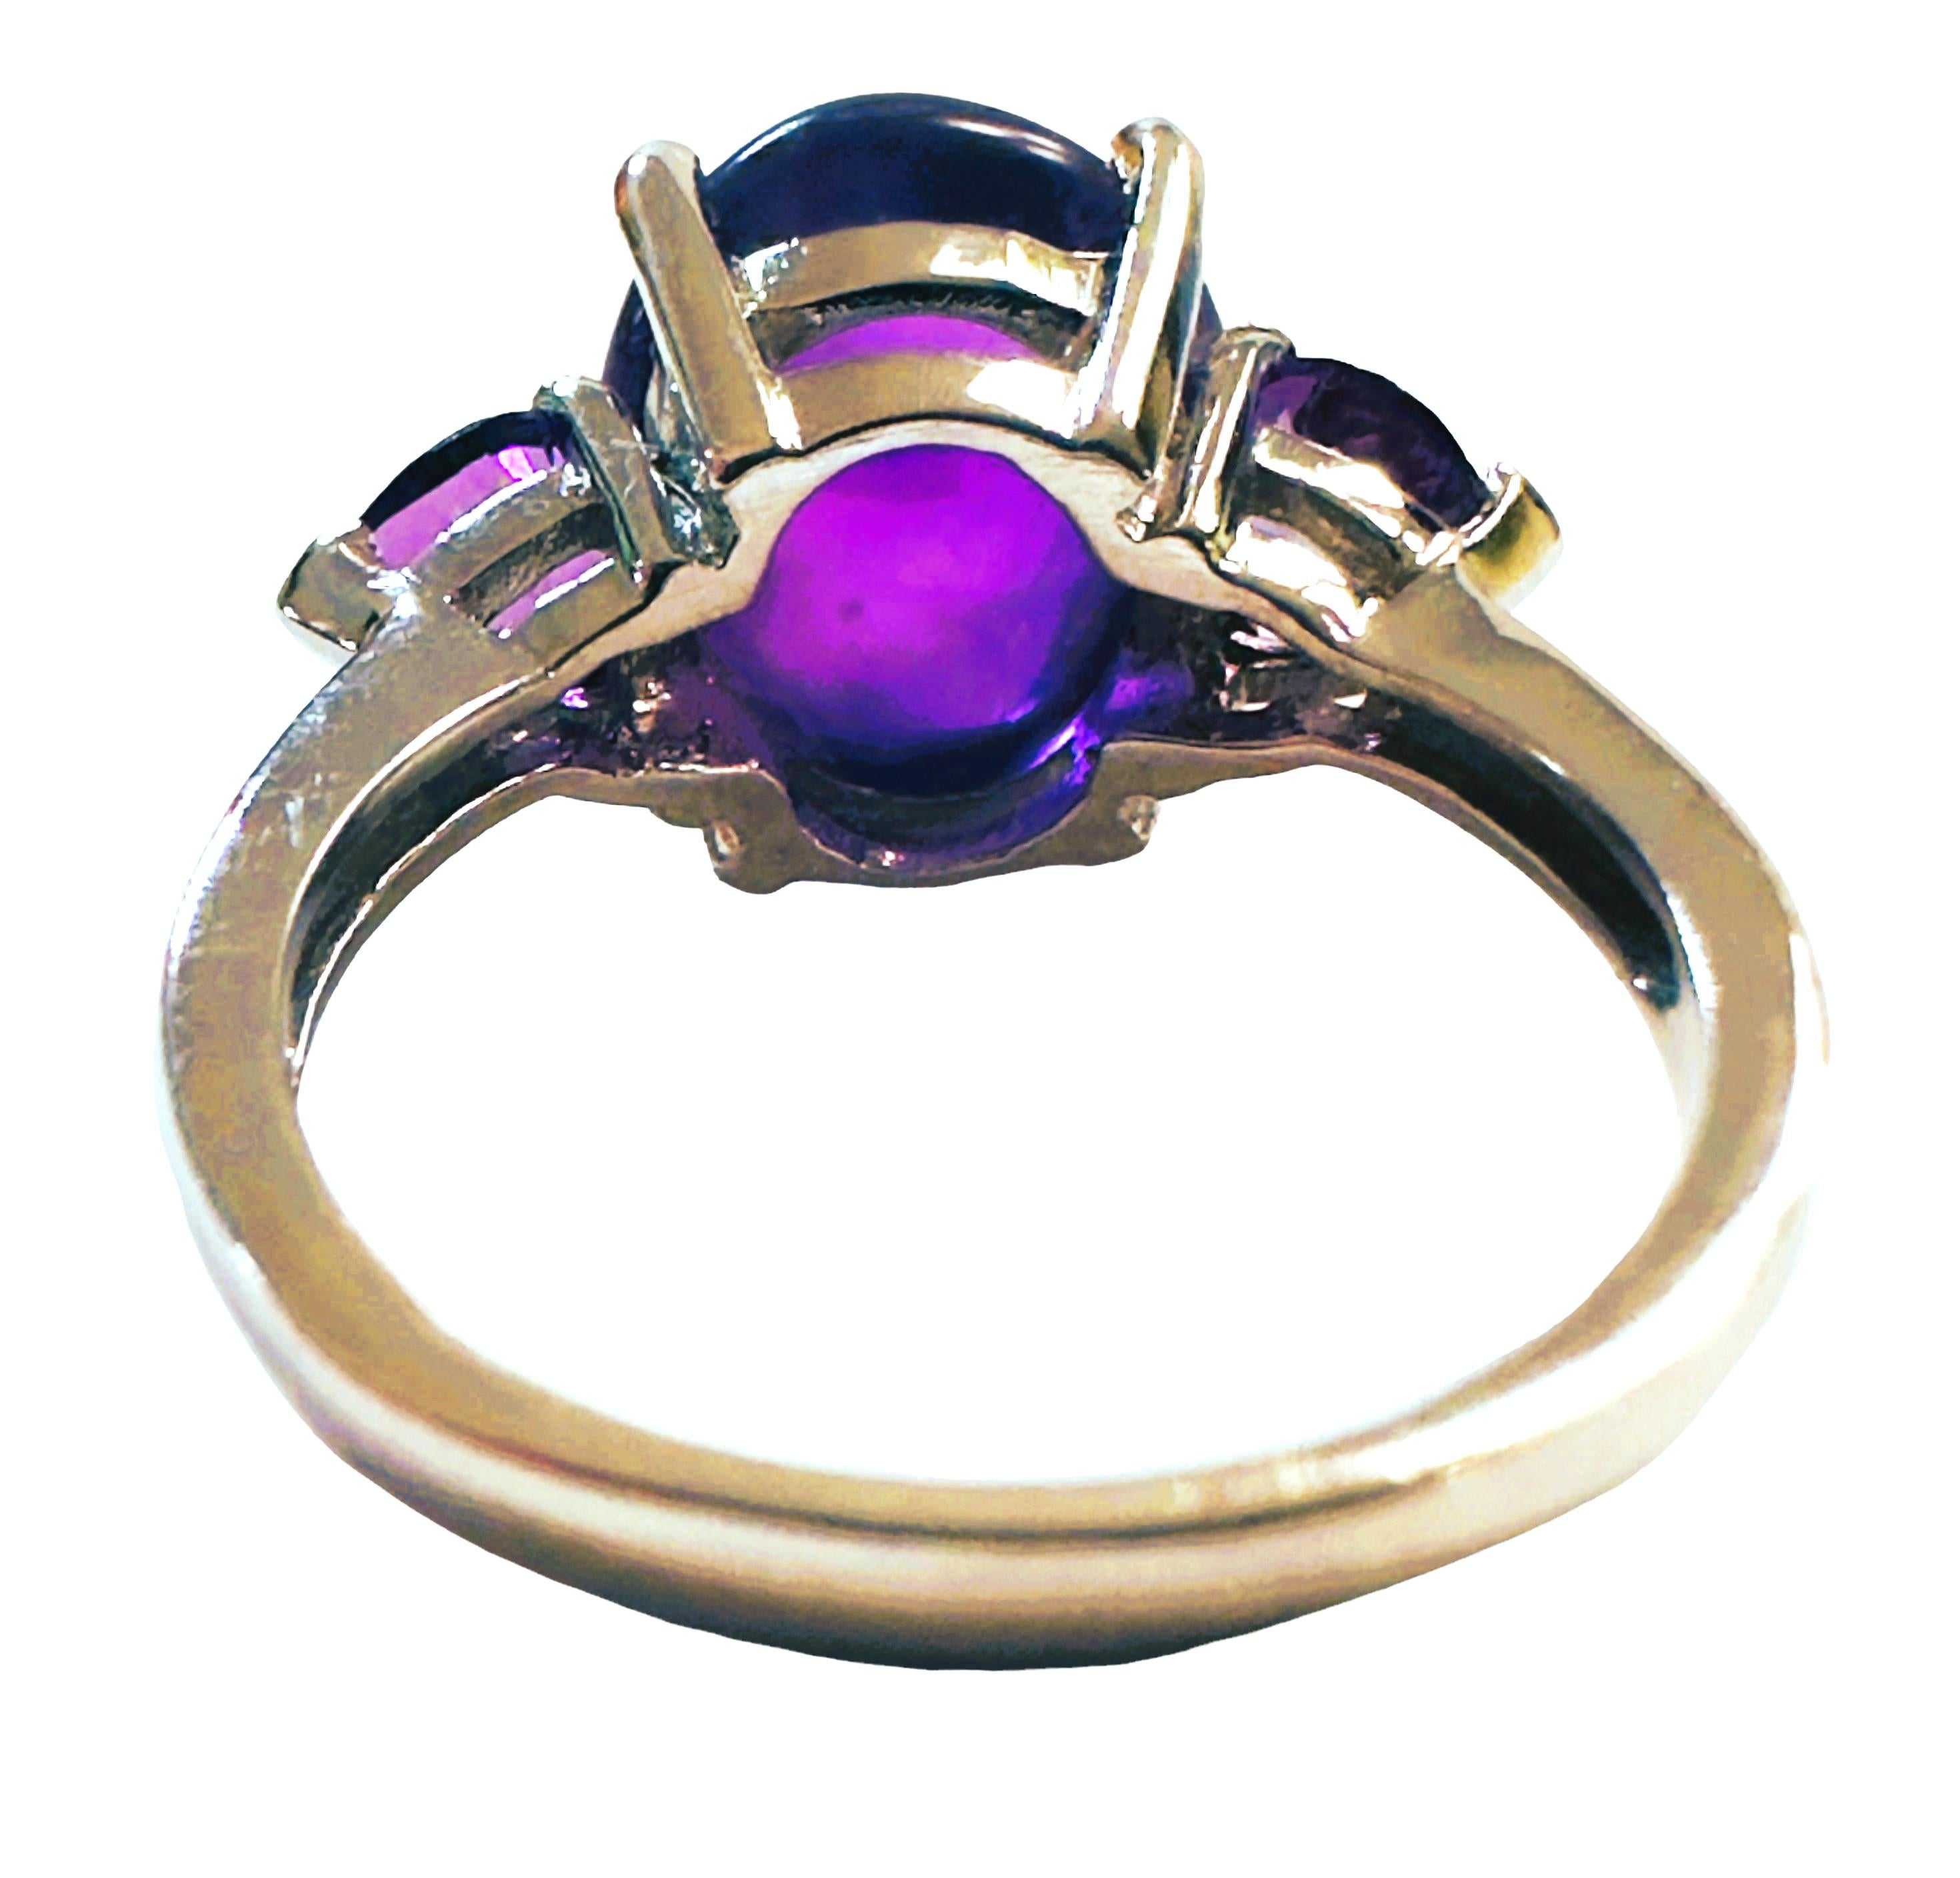 New Brazilian 7.3 Ct Cabochon & Trillion Cut Amethyst Sterling Ring Size 7 In New Condition For Sale In Eagan, MN